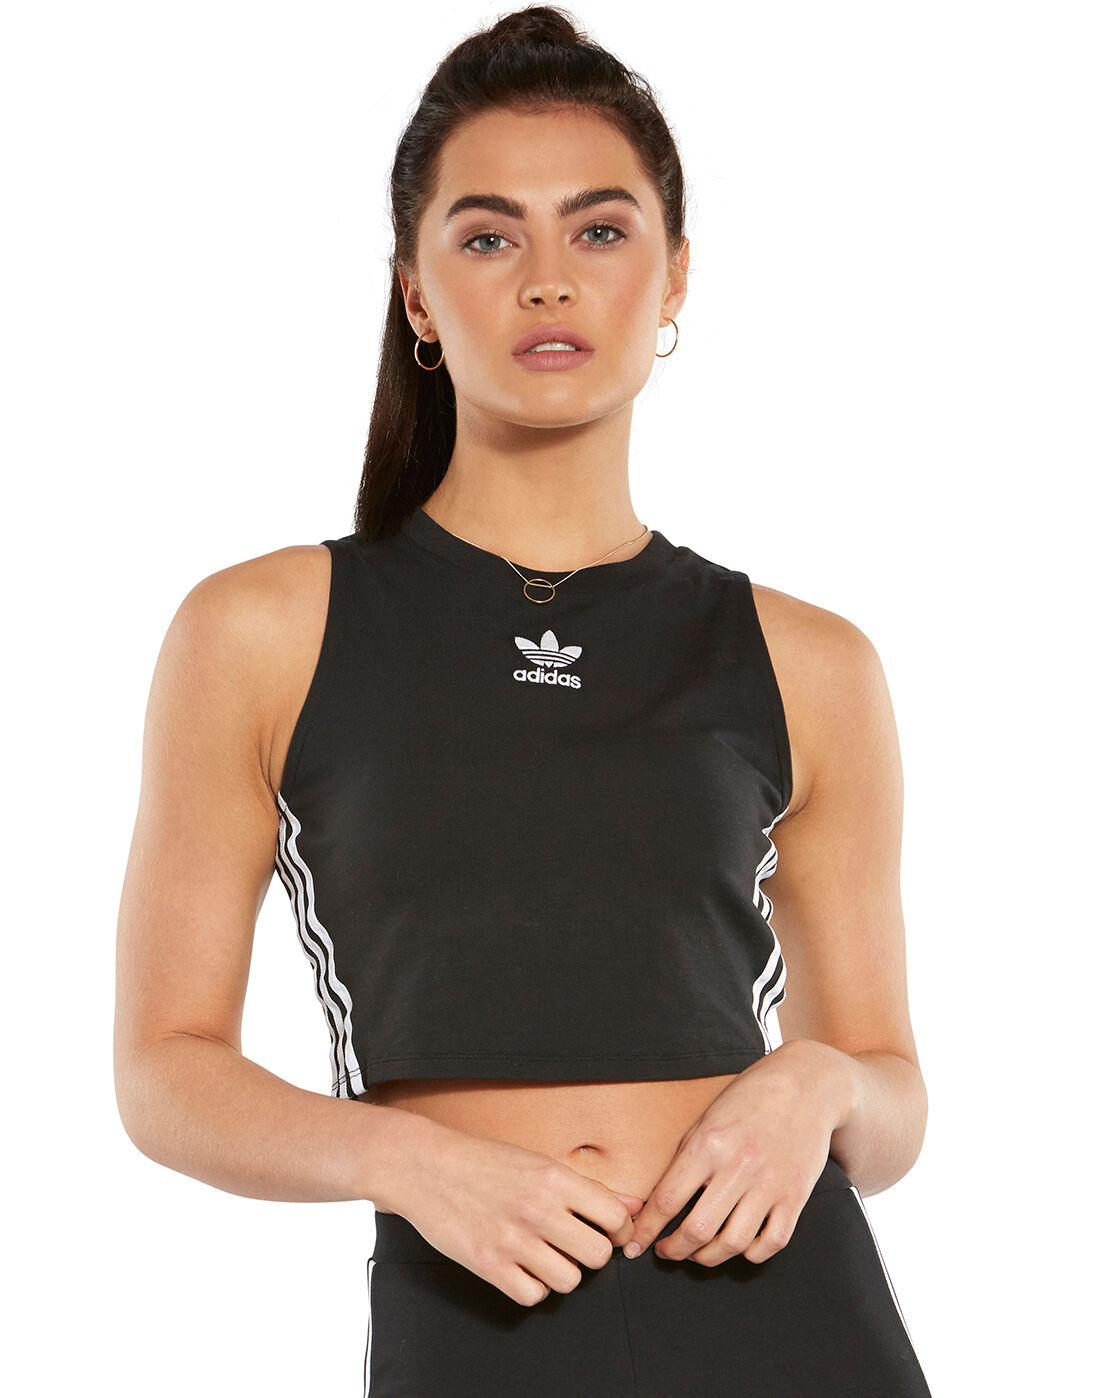 adidas cropped tank tops